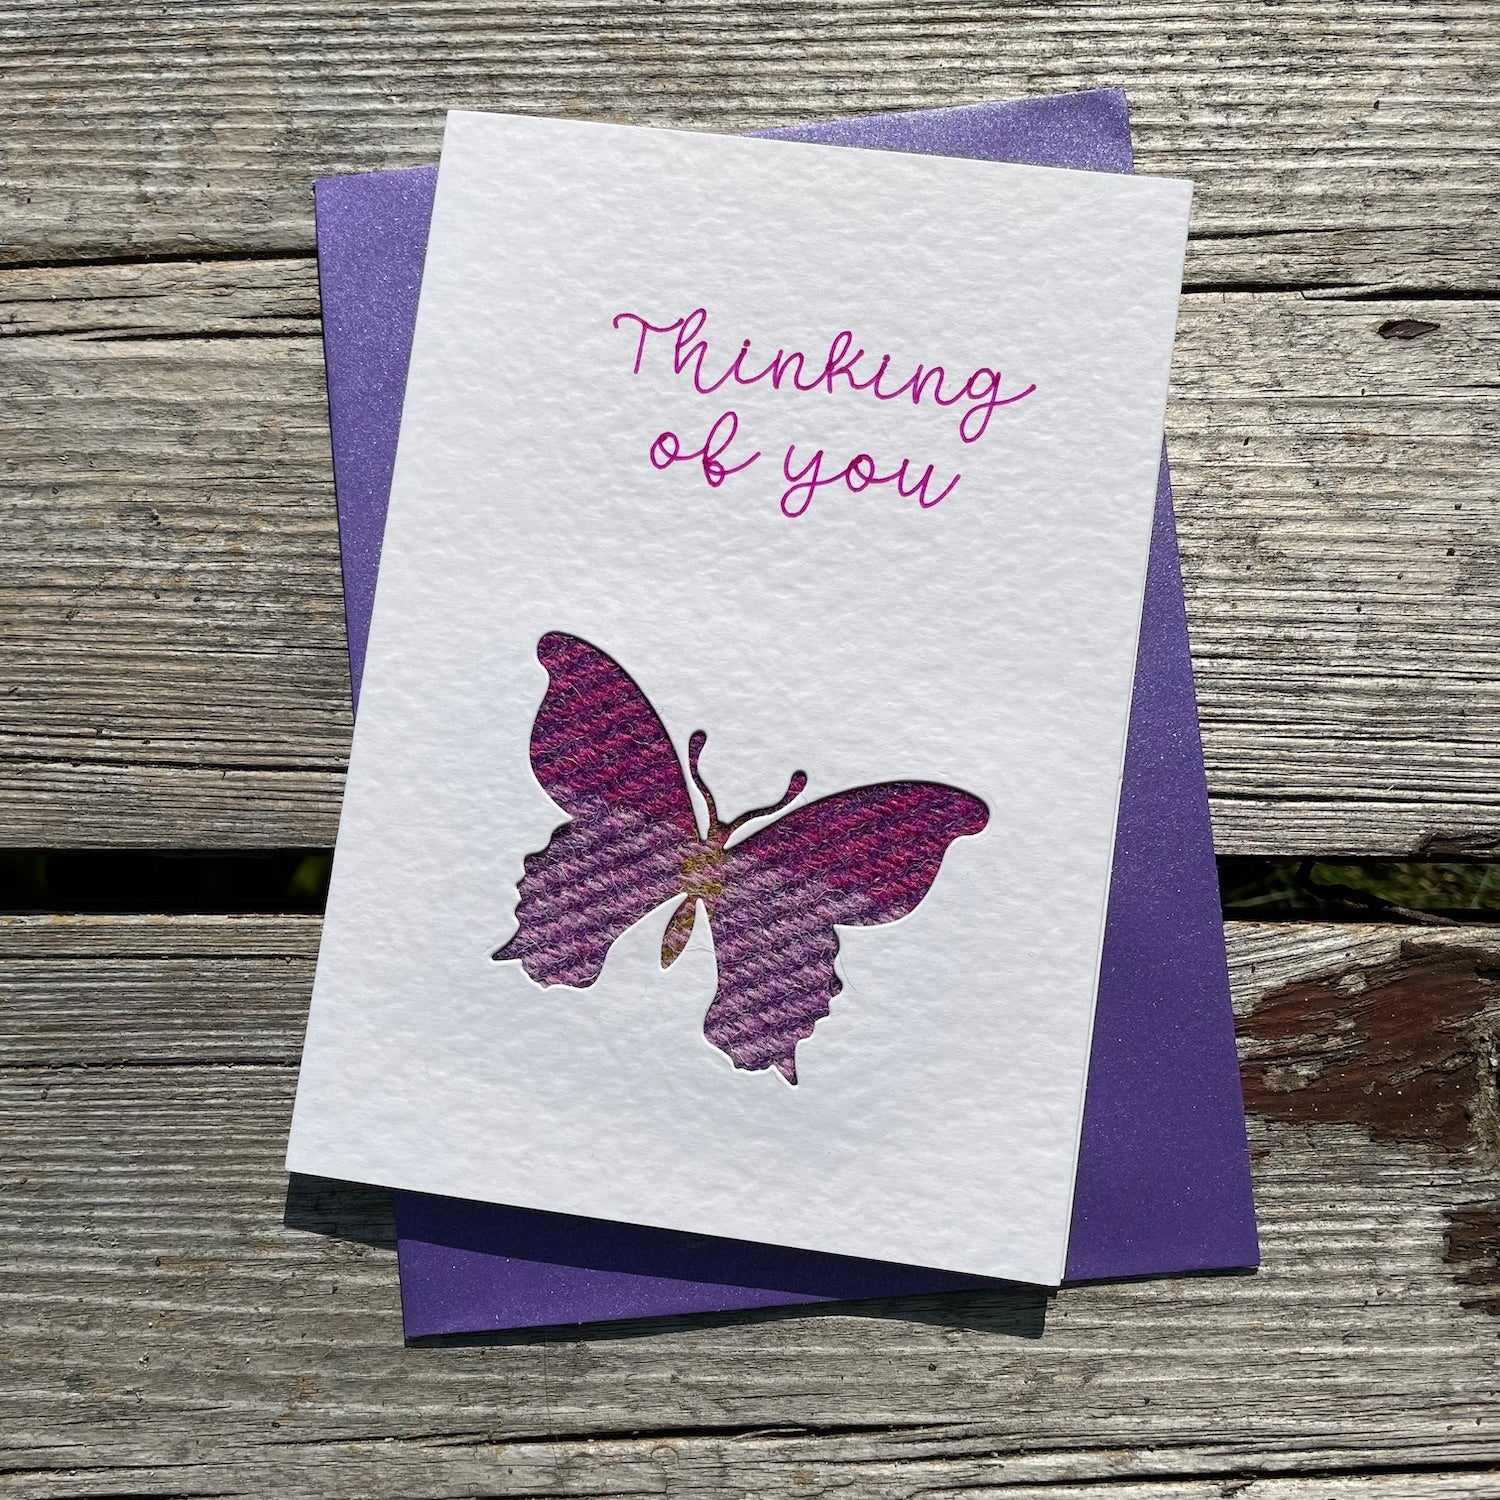 Handmade Scottish Greeting Card featuring Harris Tweed® Butterfly Thinking of you